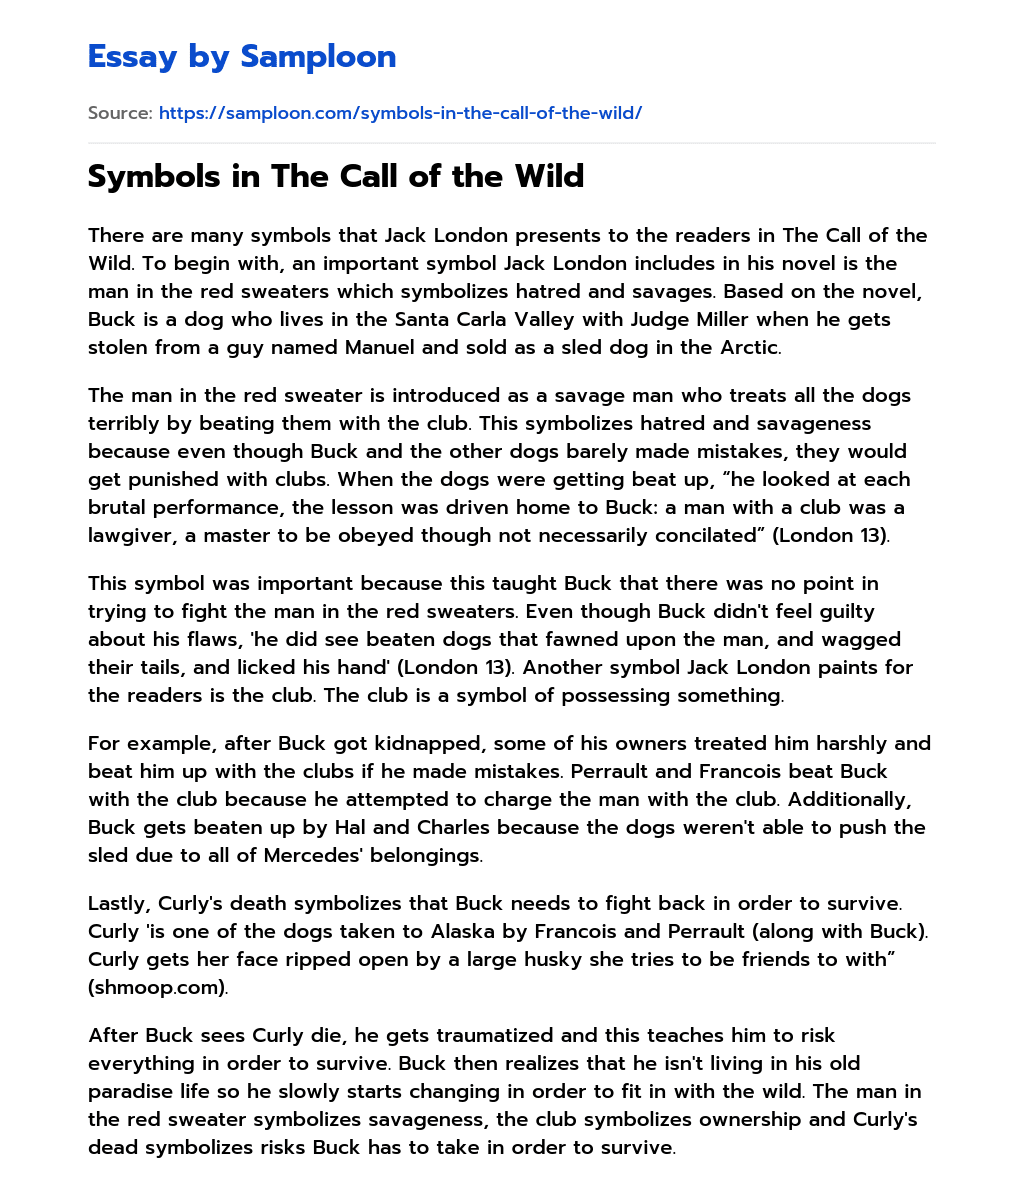 Symbols in The Call of the Wild essay